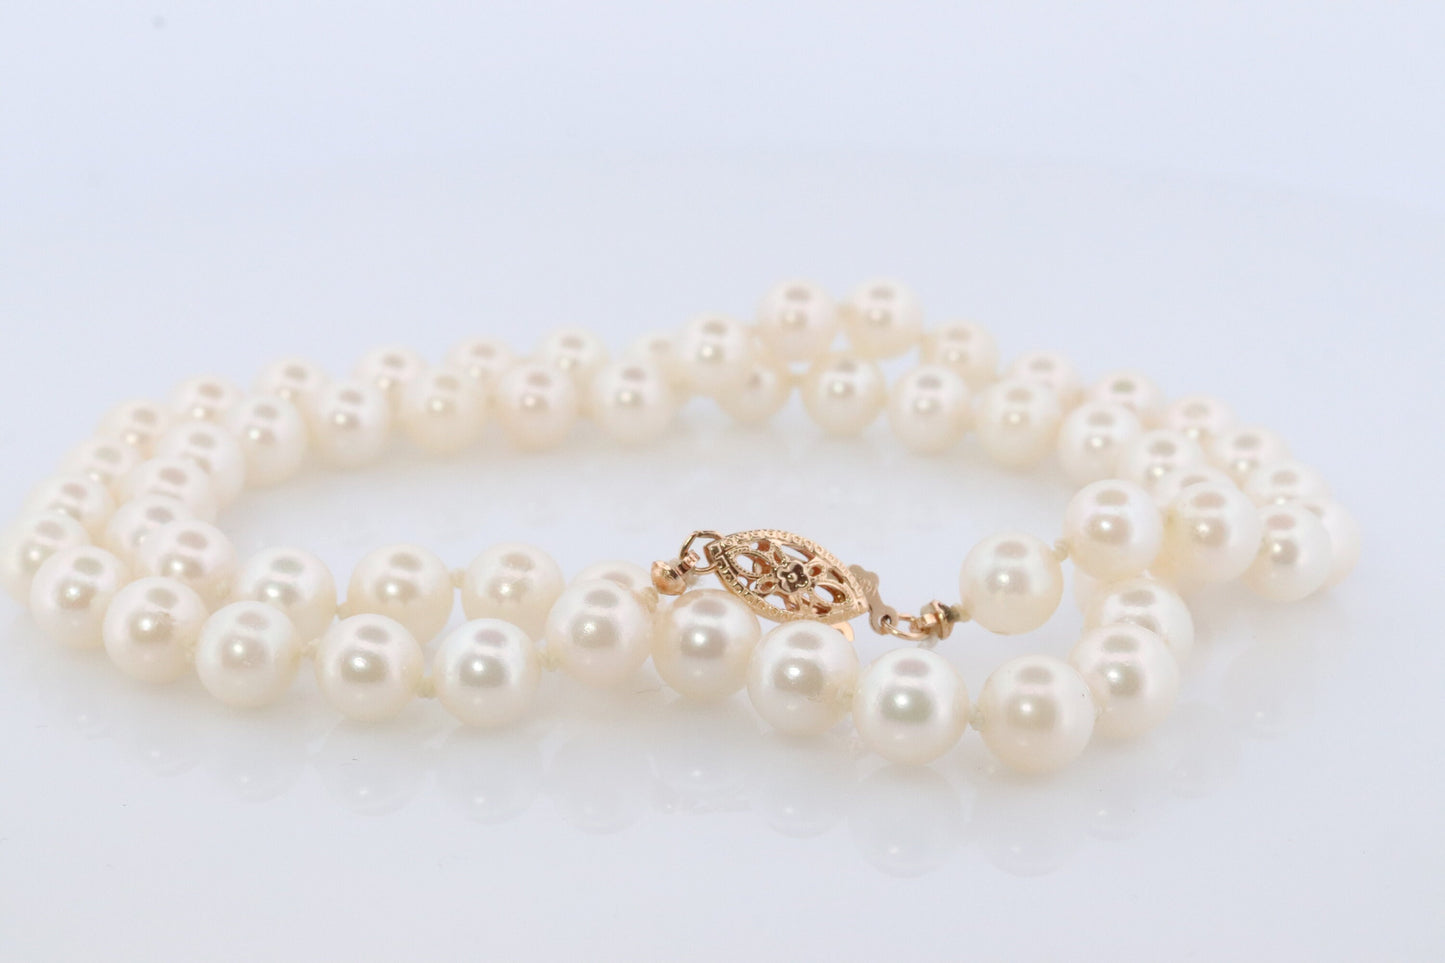 14k Akoya Pearl Necklace. 18in length 7mm AKOYA pearls with beautiful lustre.